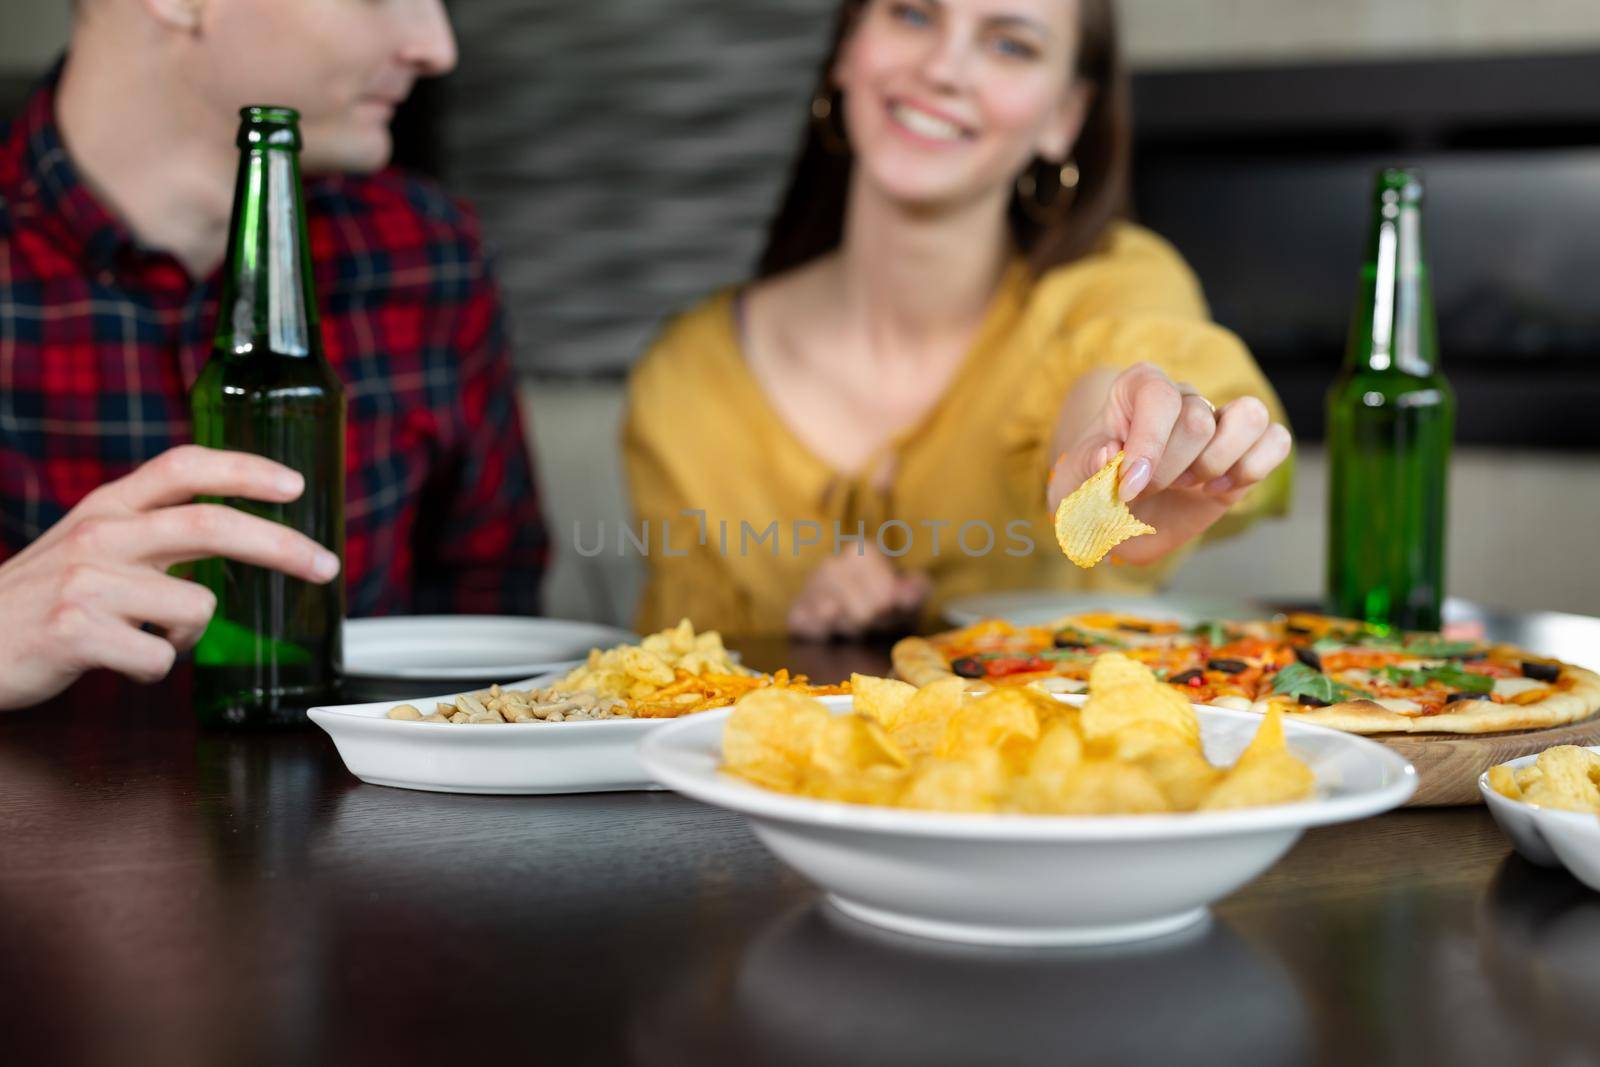 Woman eats chips and drinks beer with her boyfriend